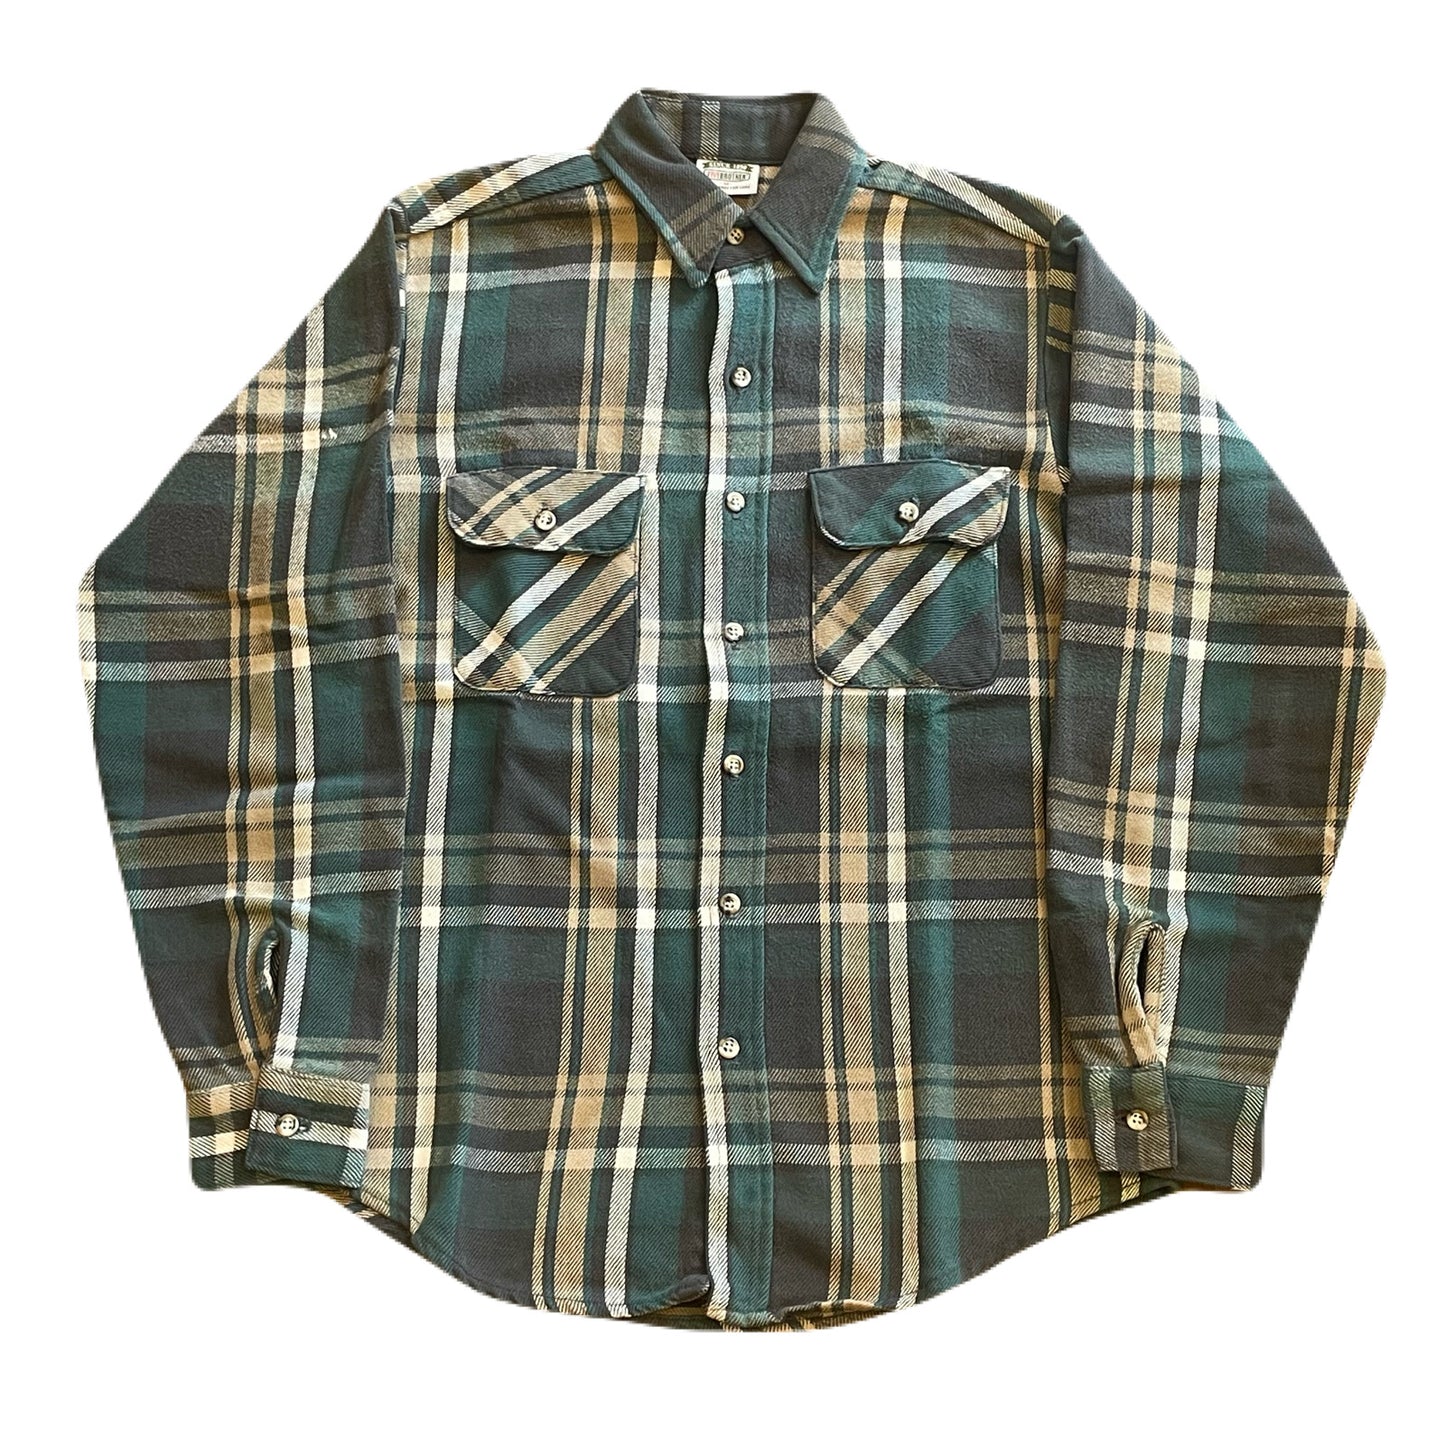 "90’s FIVE BROTHER” cotton flannel check shirt　M